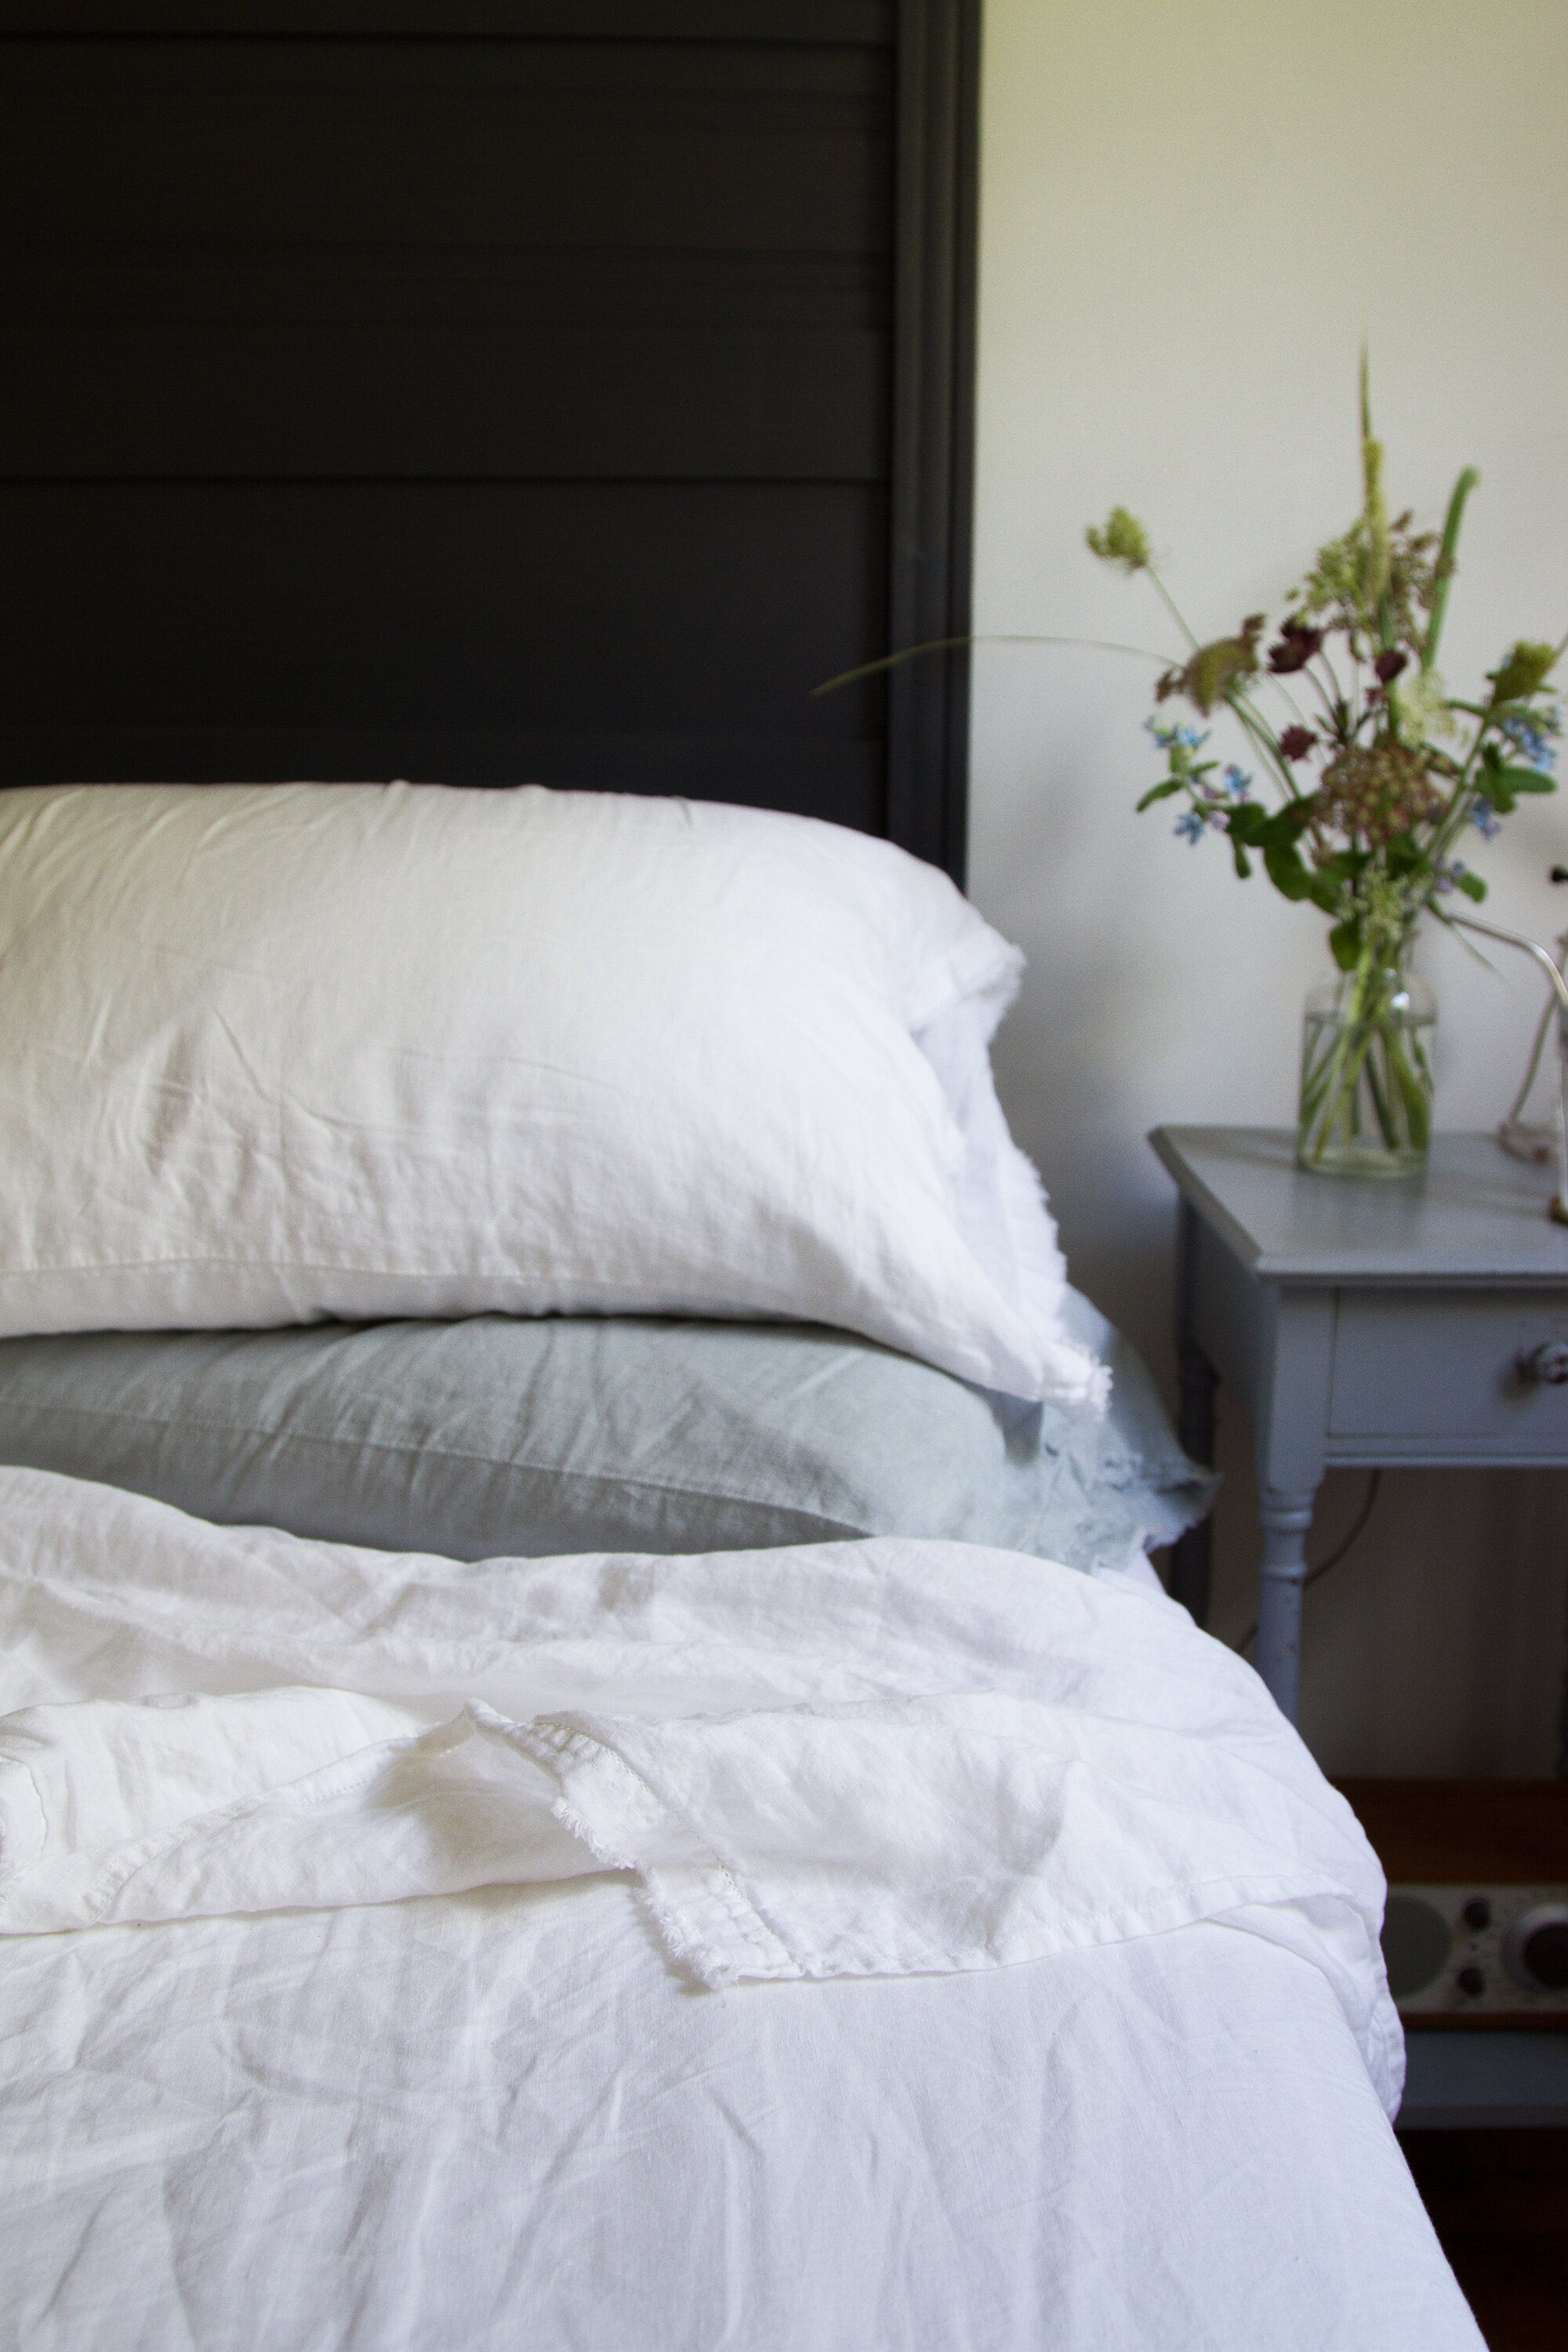 linen bed sheets from garnet hill's eileen fisher collection |reading my tea leaves